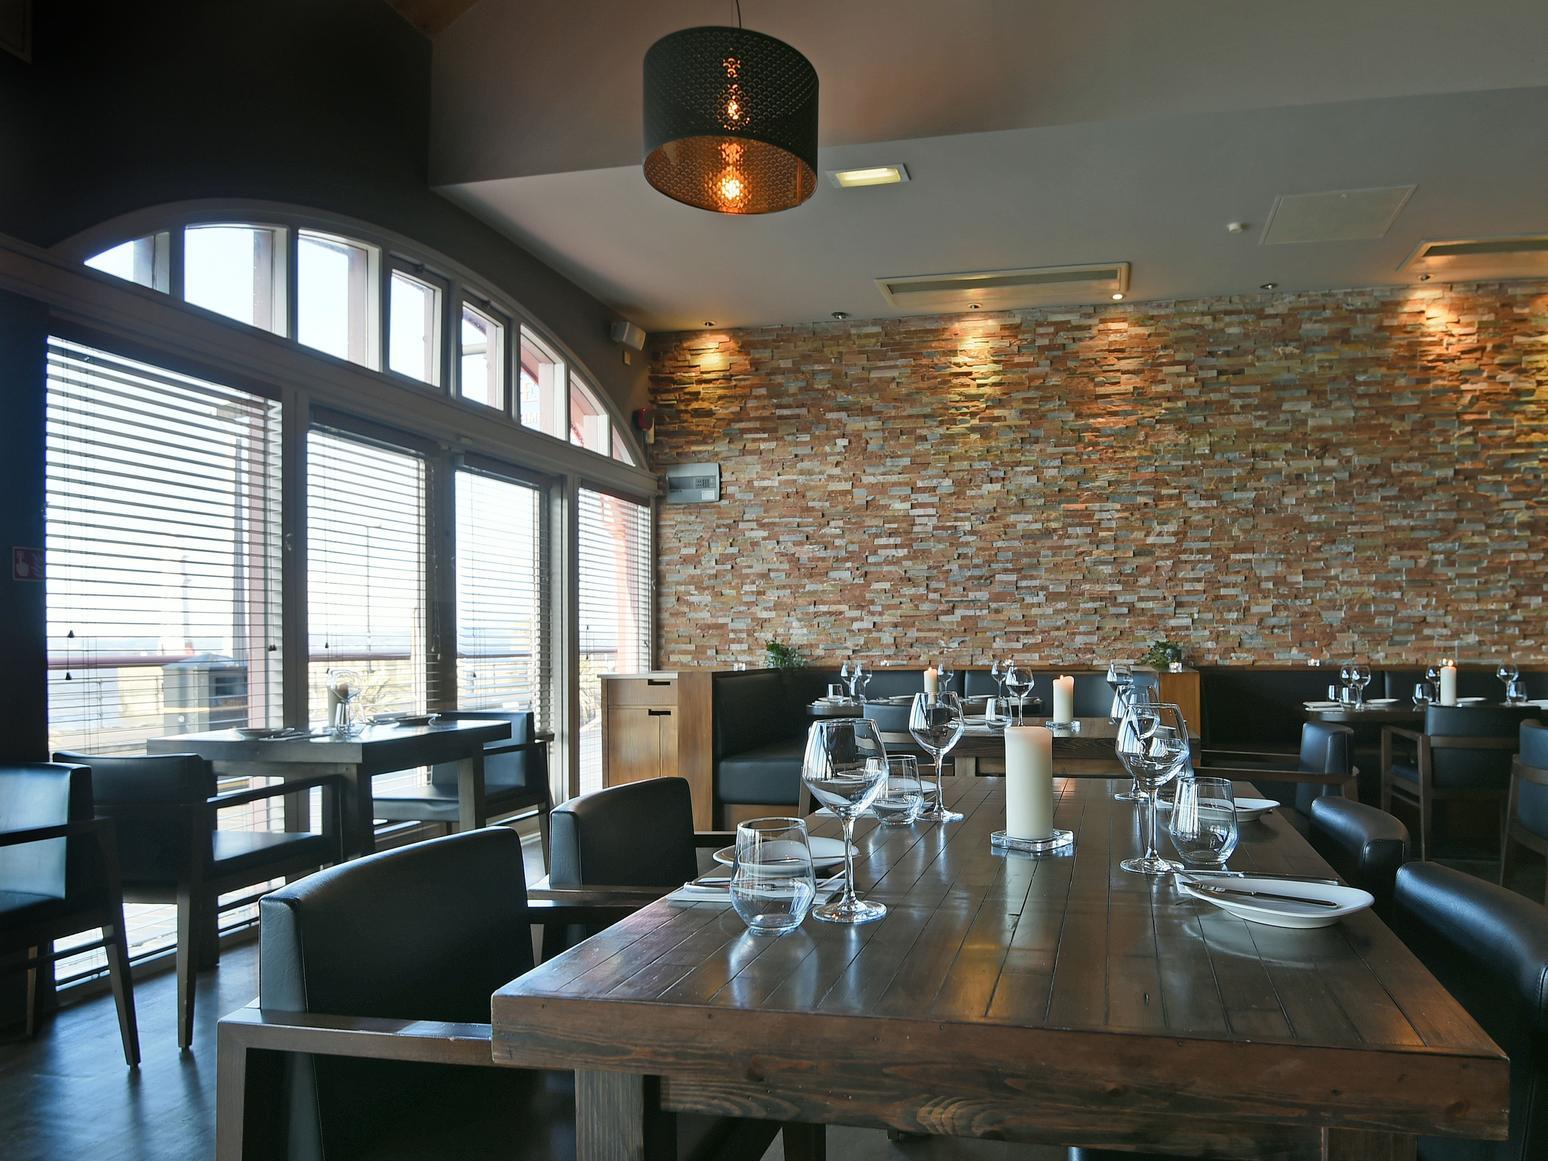 It will have a modern feel and combine fine dining elements with a more casual feel